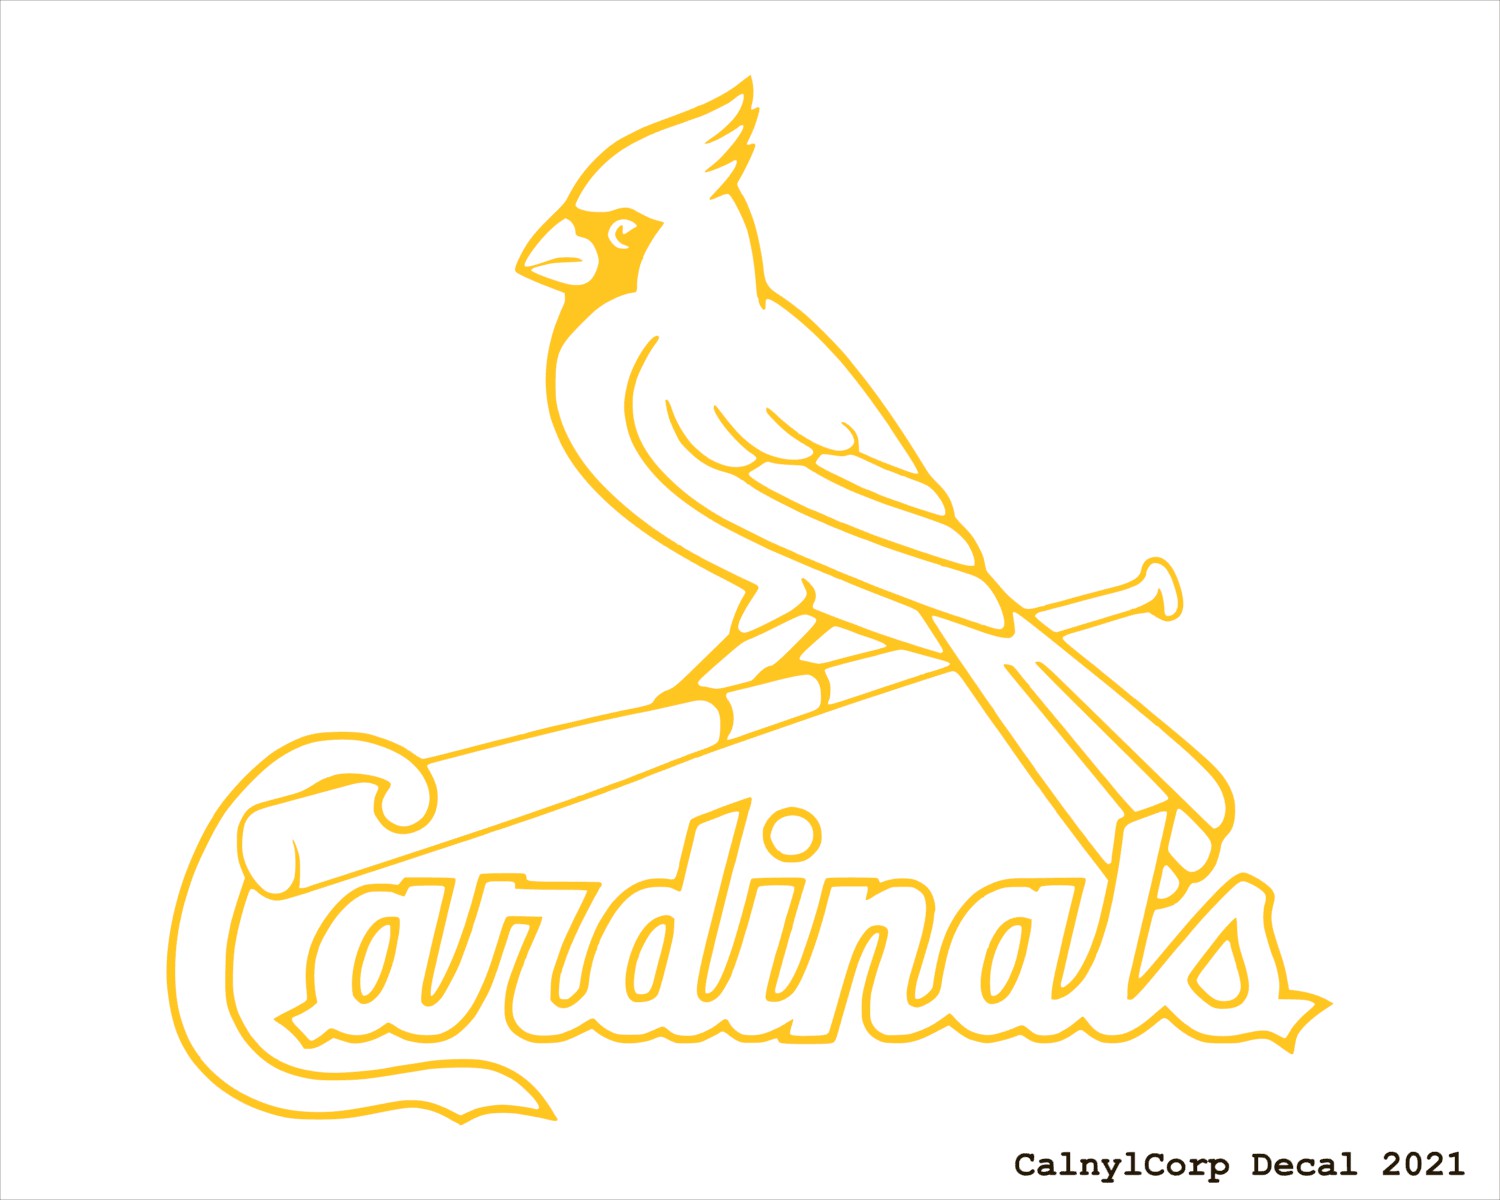 Vintage Iconic St. Louis Cardinals Sticker 4 Round Baseball Decal - New